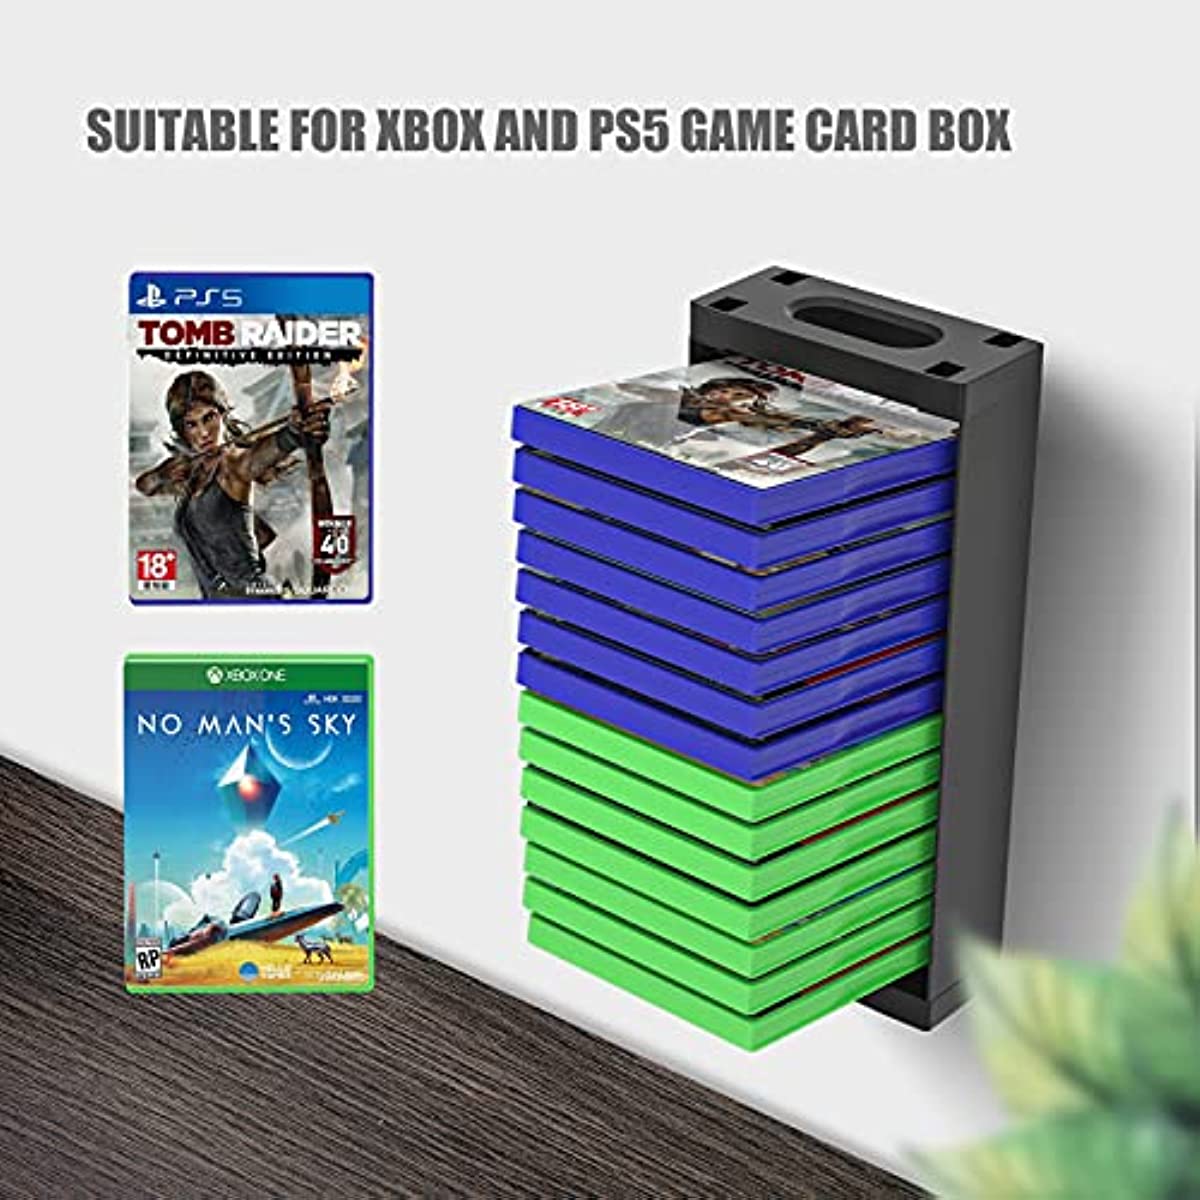 Xbox Game Card Case Storage Wall Mount, Xbox One Game Card Box Storage Stand Wall Mount Compatible with PS5 PS4 Games Xbox Series X/S Games (14 Game Boxes)